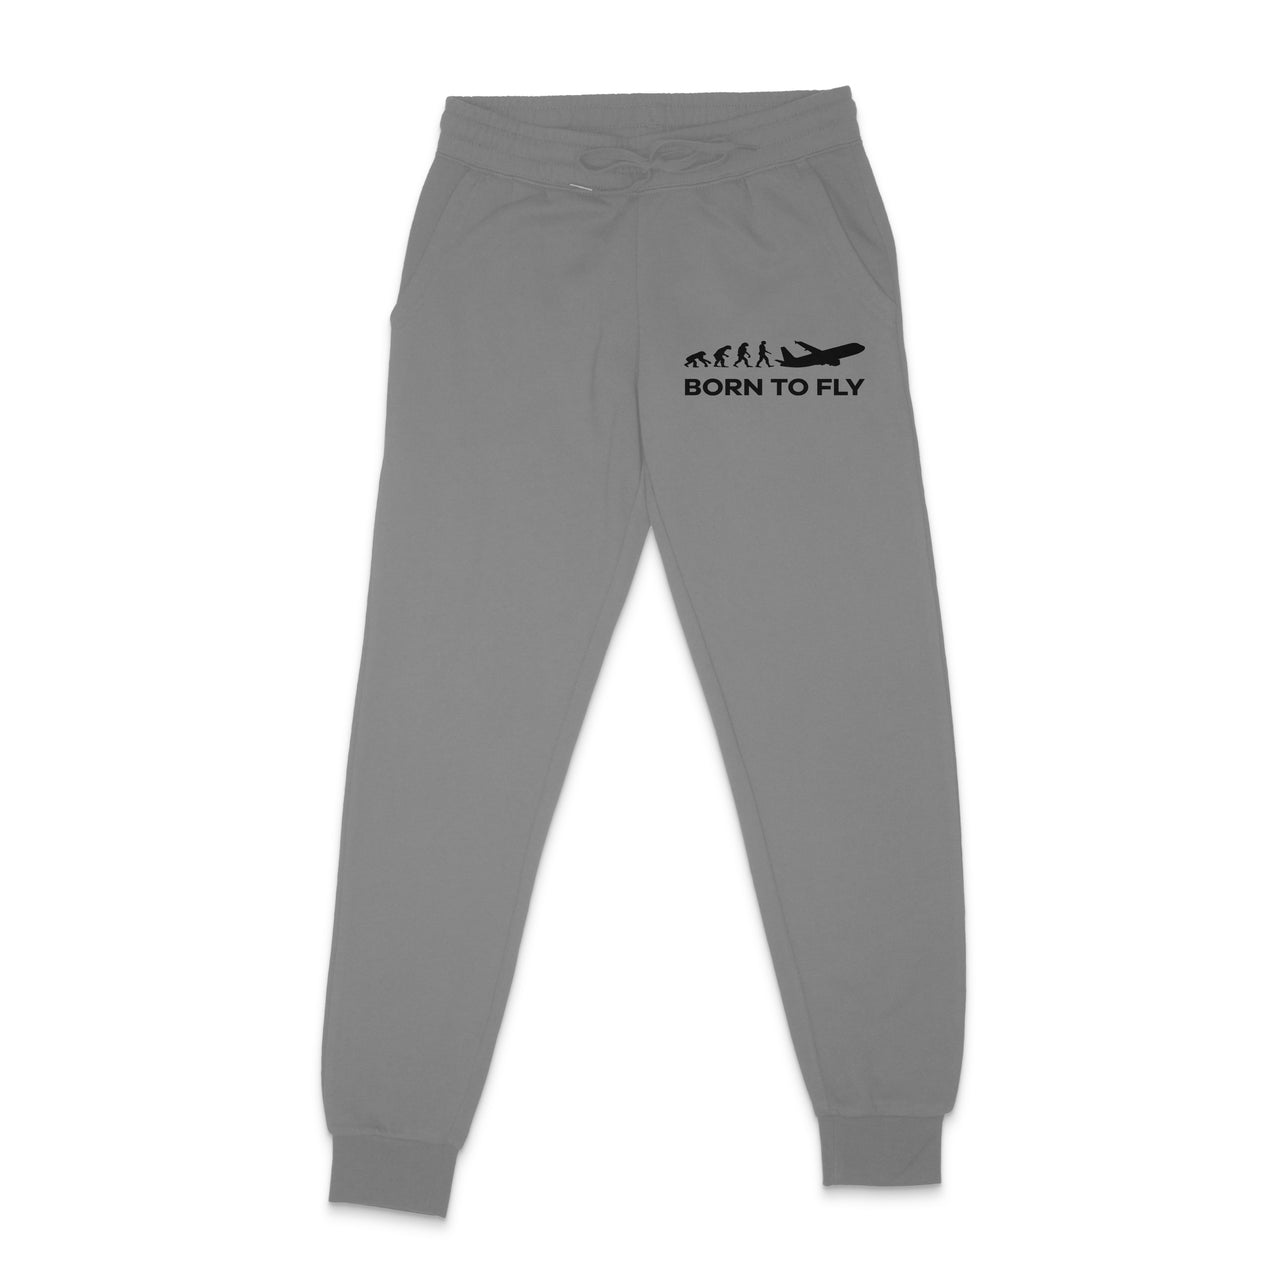 Born To Fly Designed Sweatpants